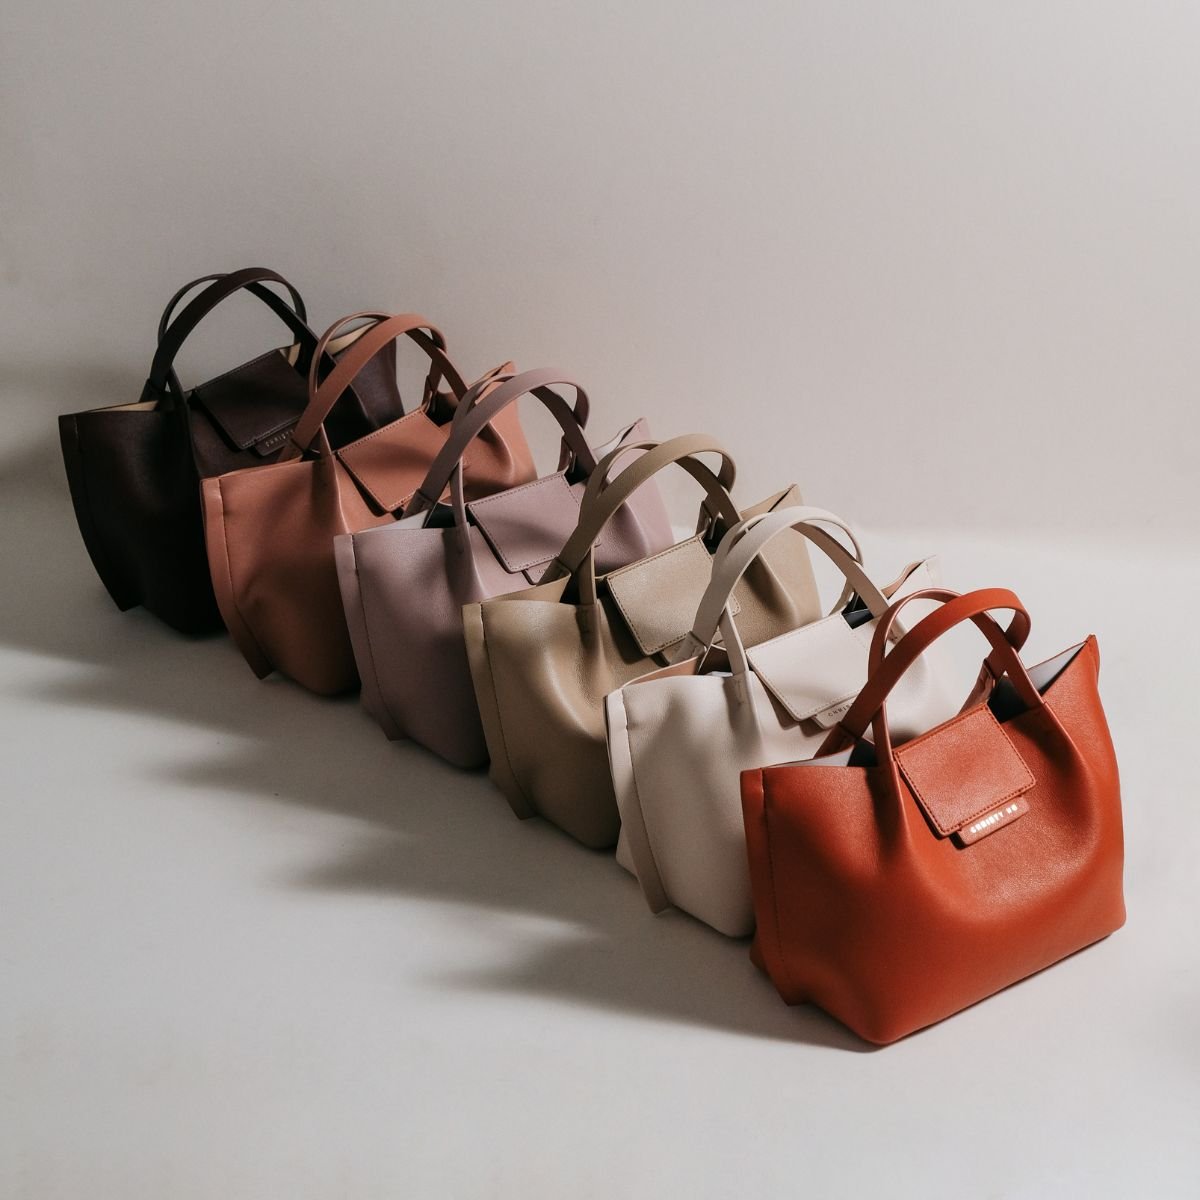 FASHION: CU rolls out tote bags with Christy Ng